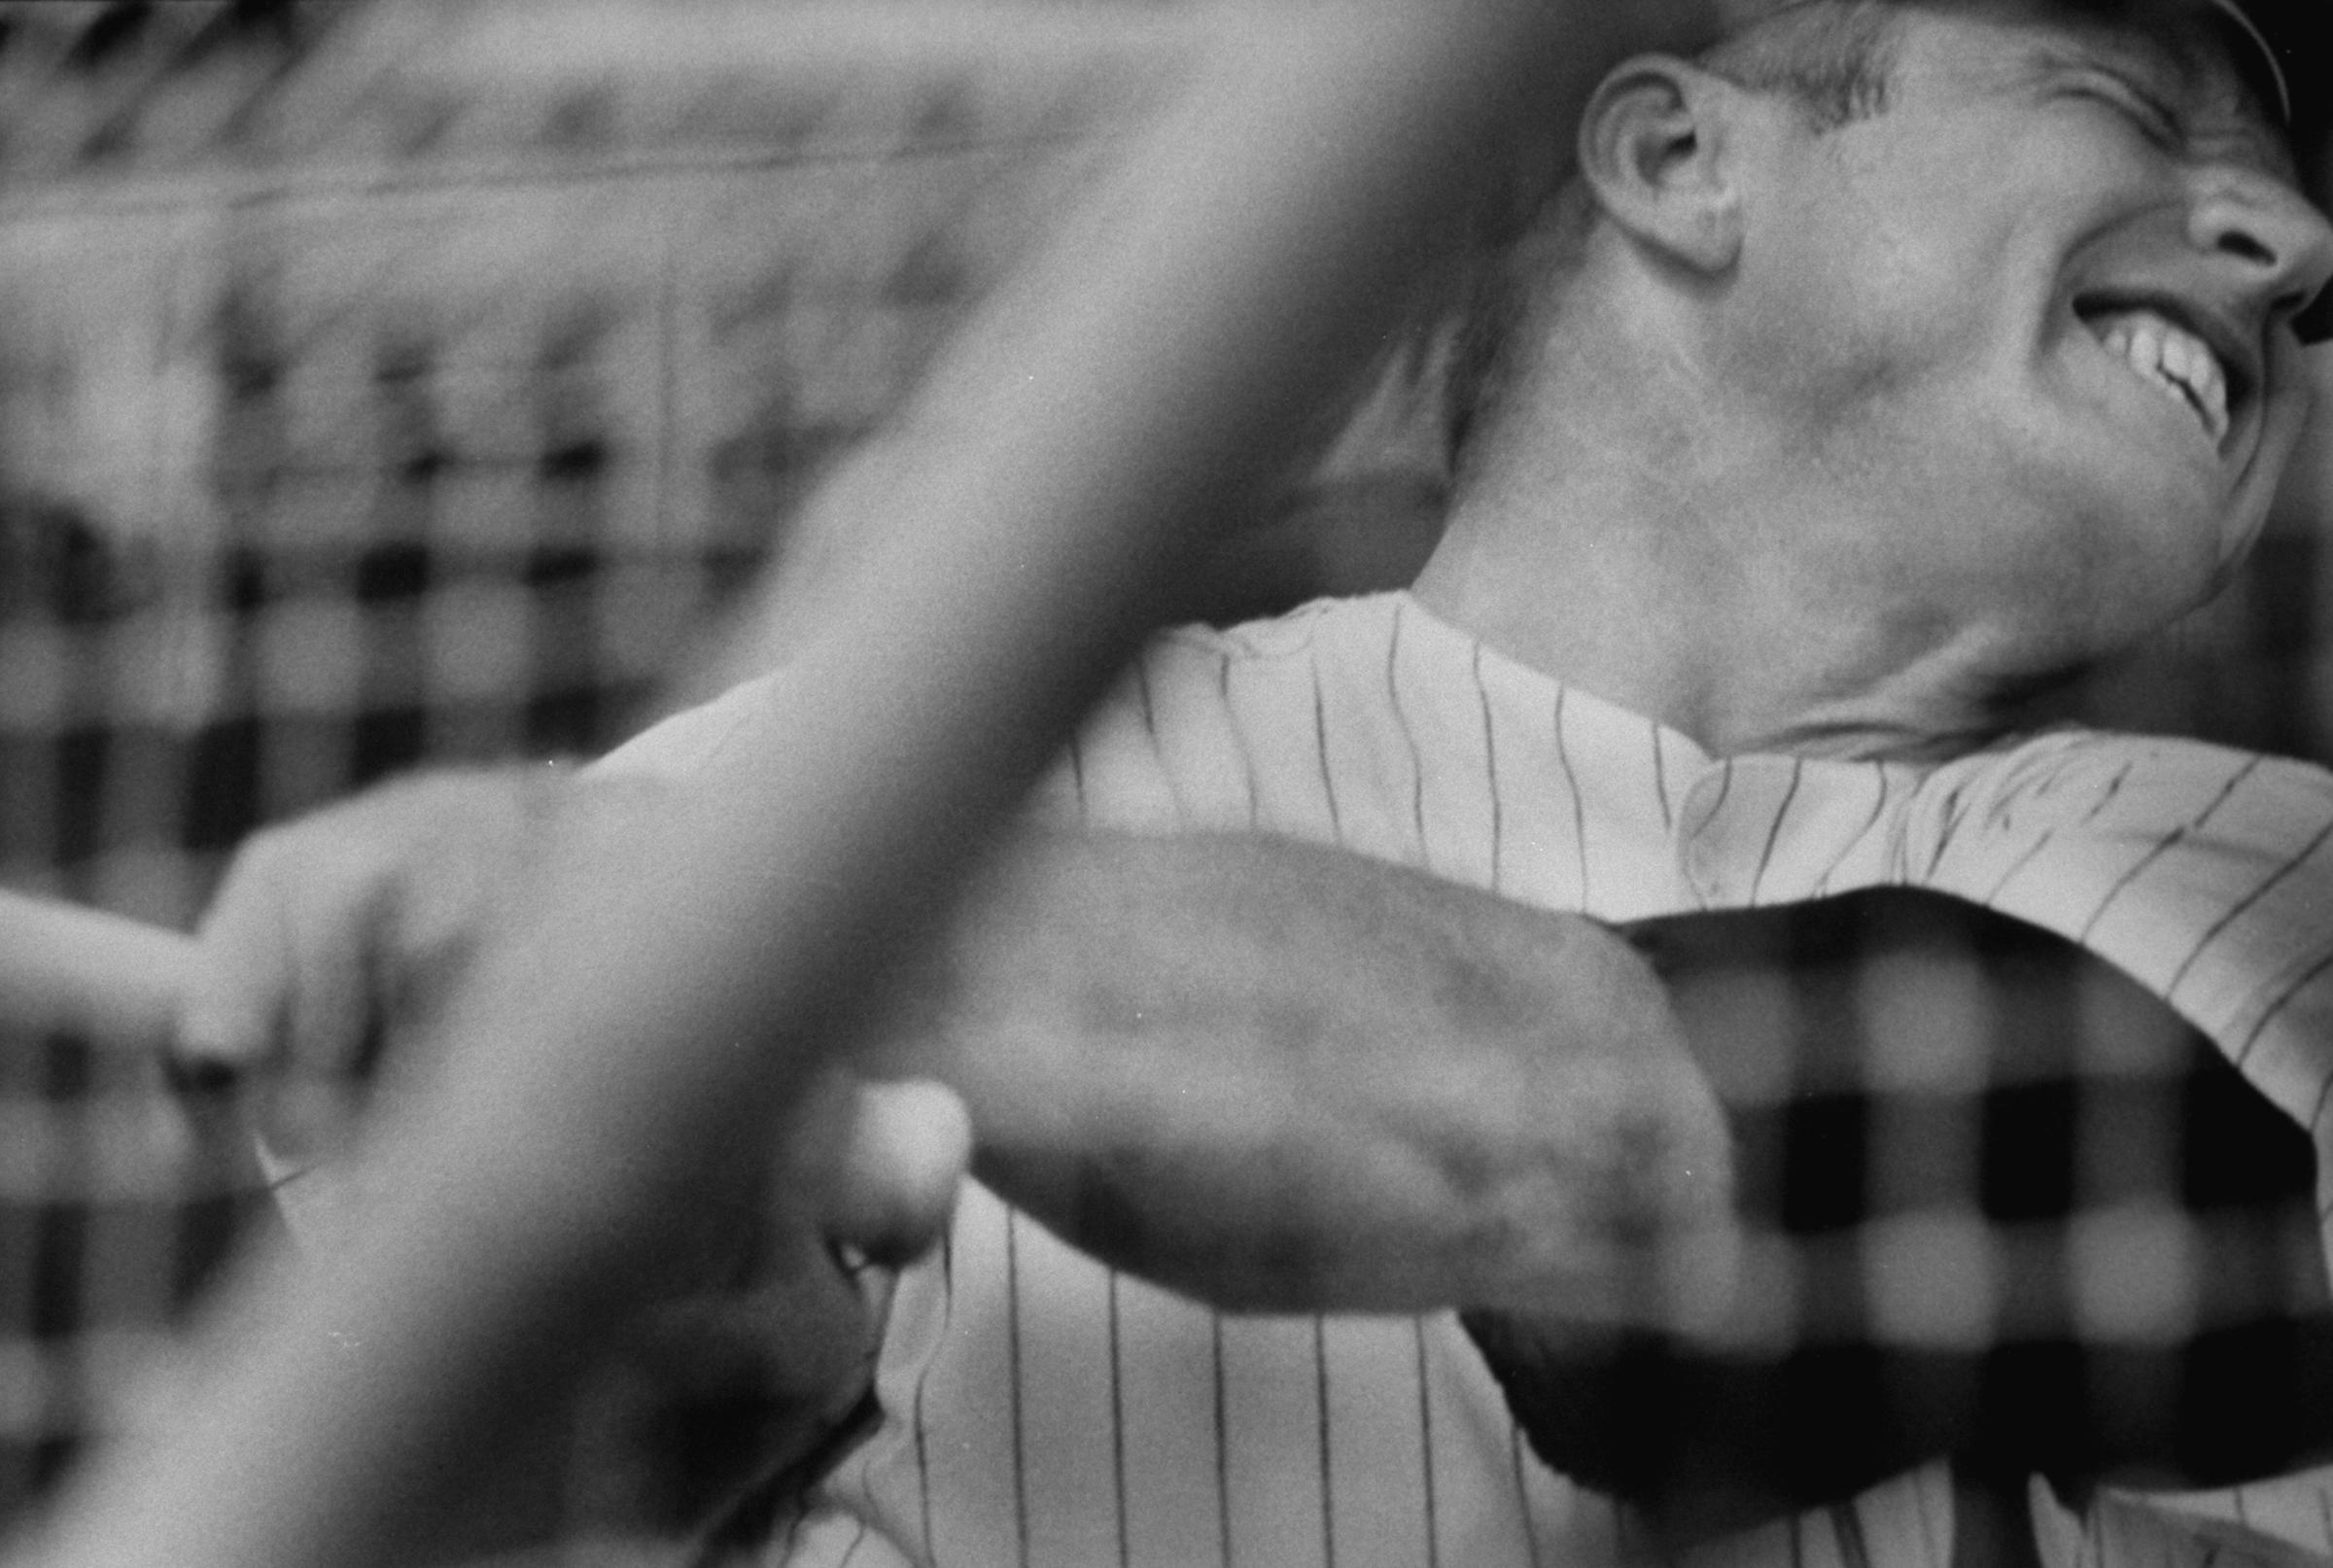 Mantle grimacing while swinging during Spring training in March 1967